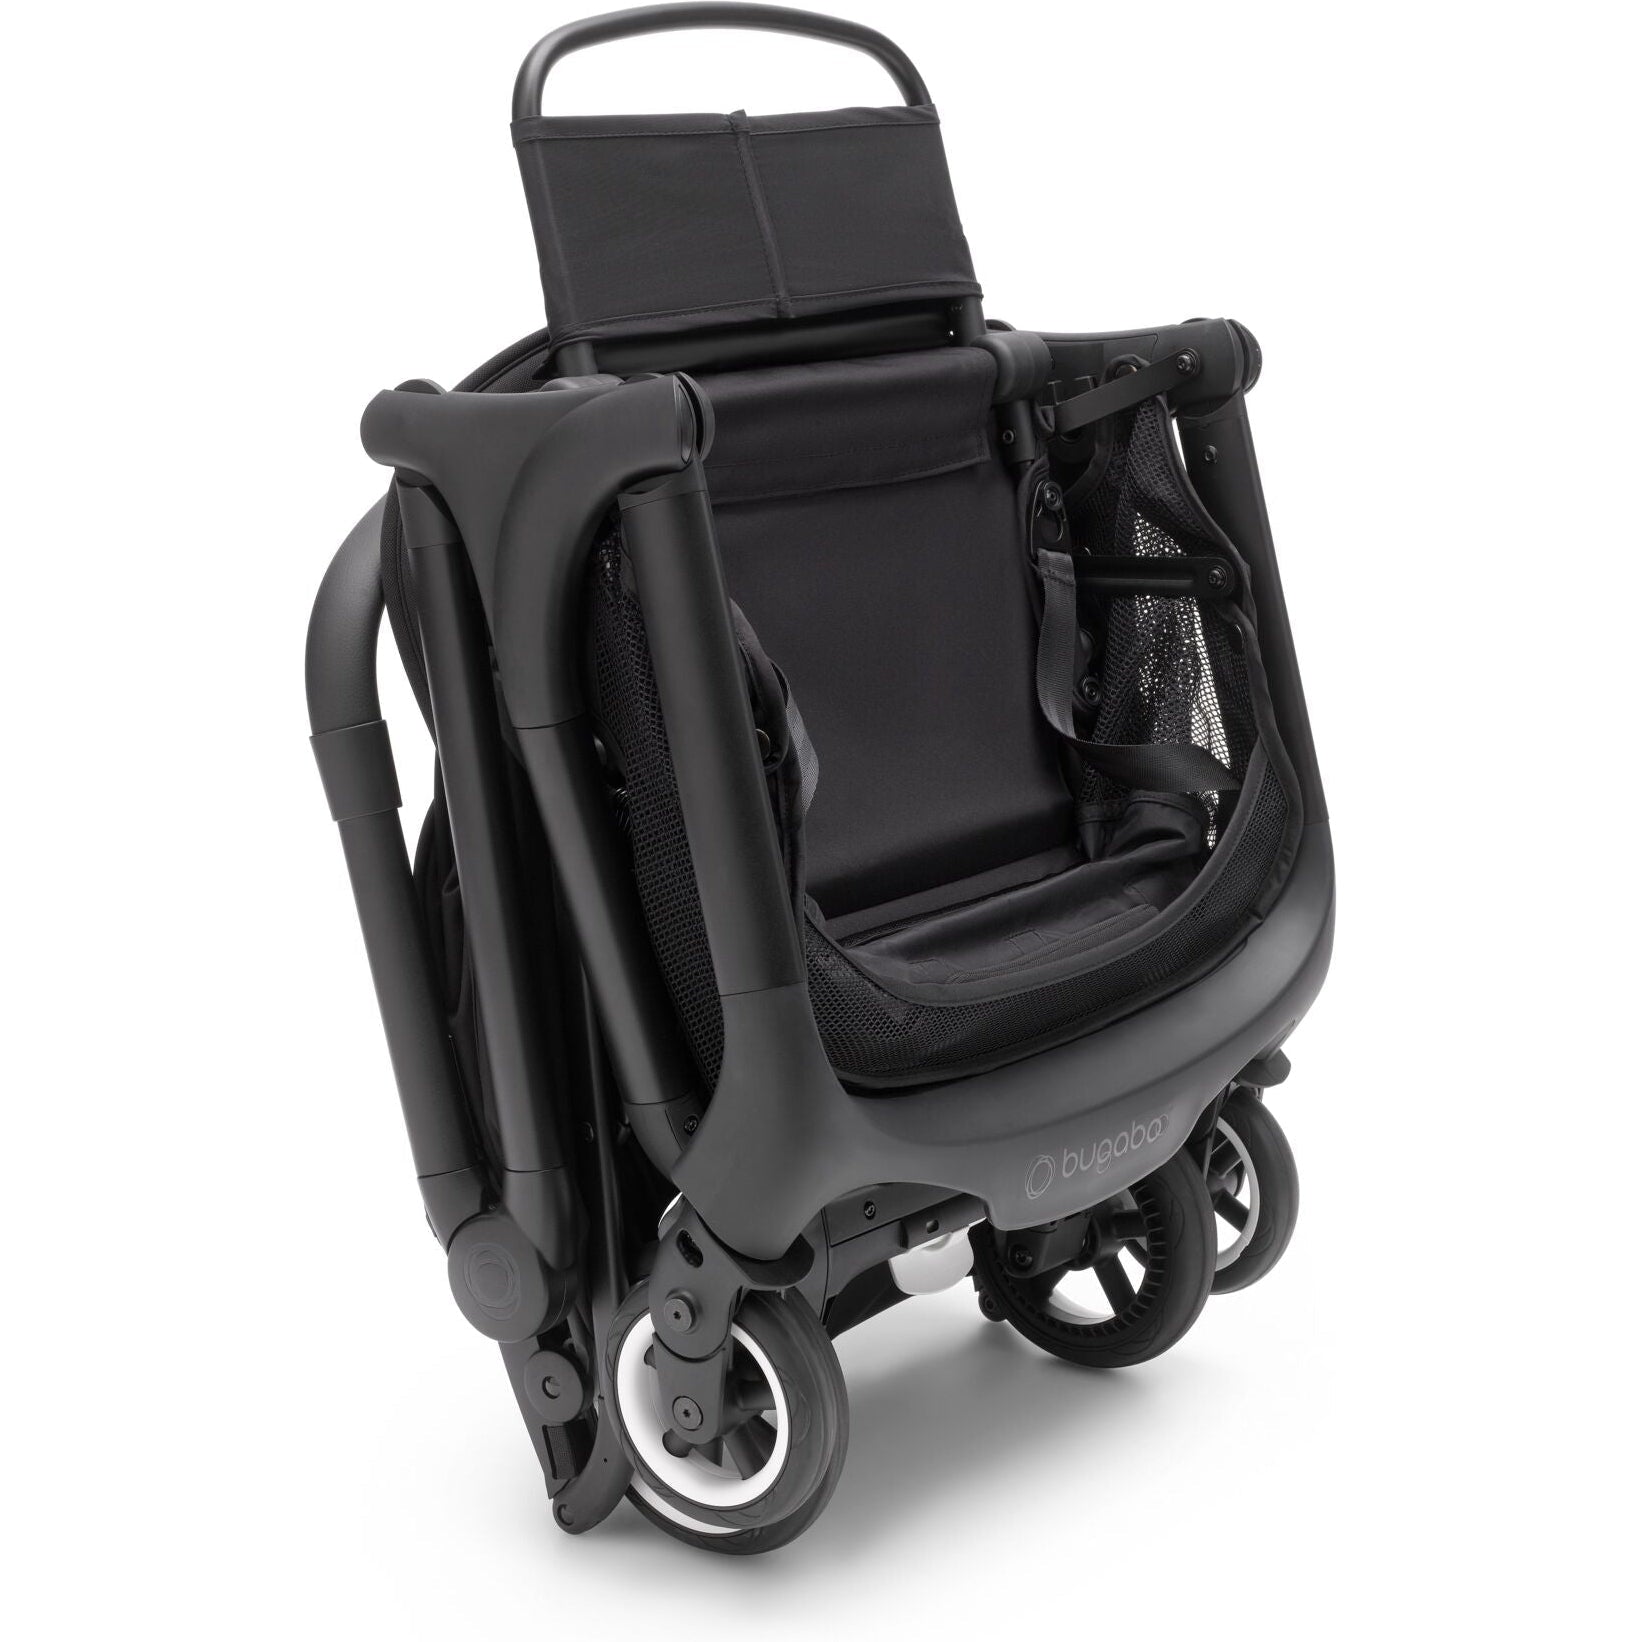 Bugaboo Butterfly Stroller Review - Consumer Reports